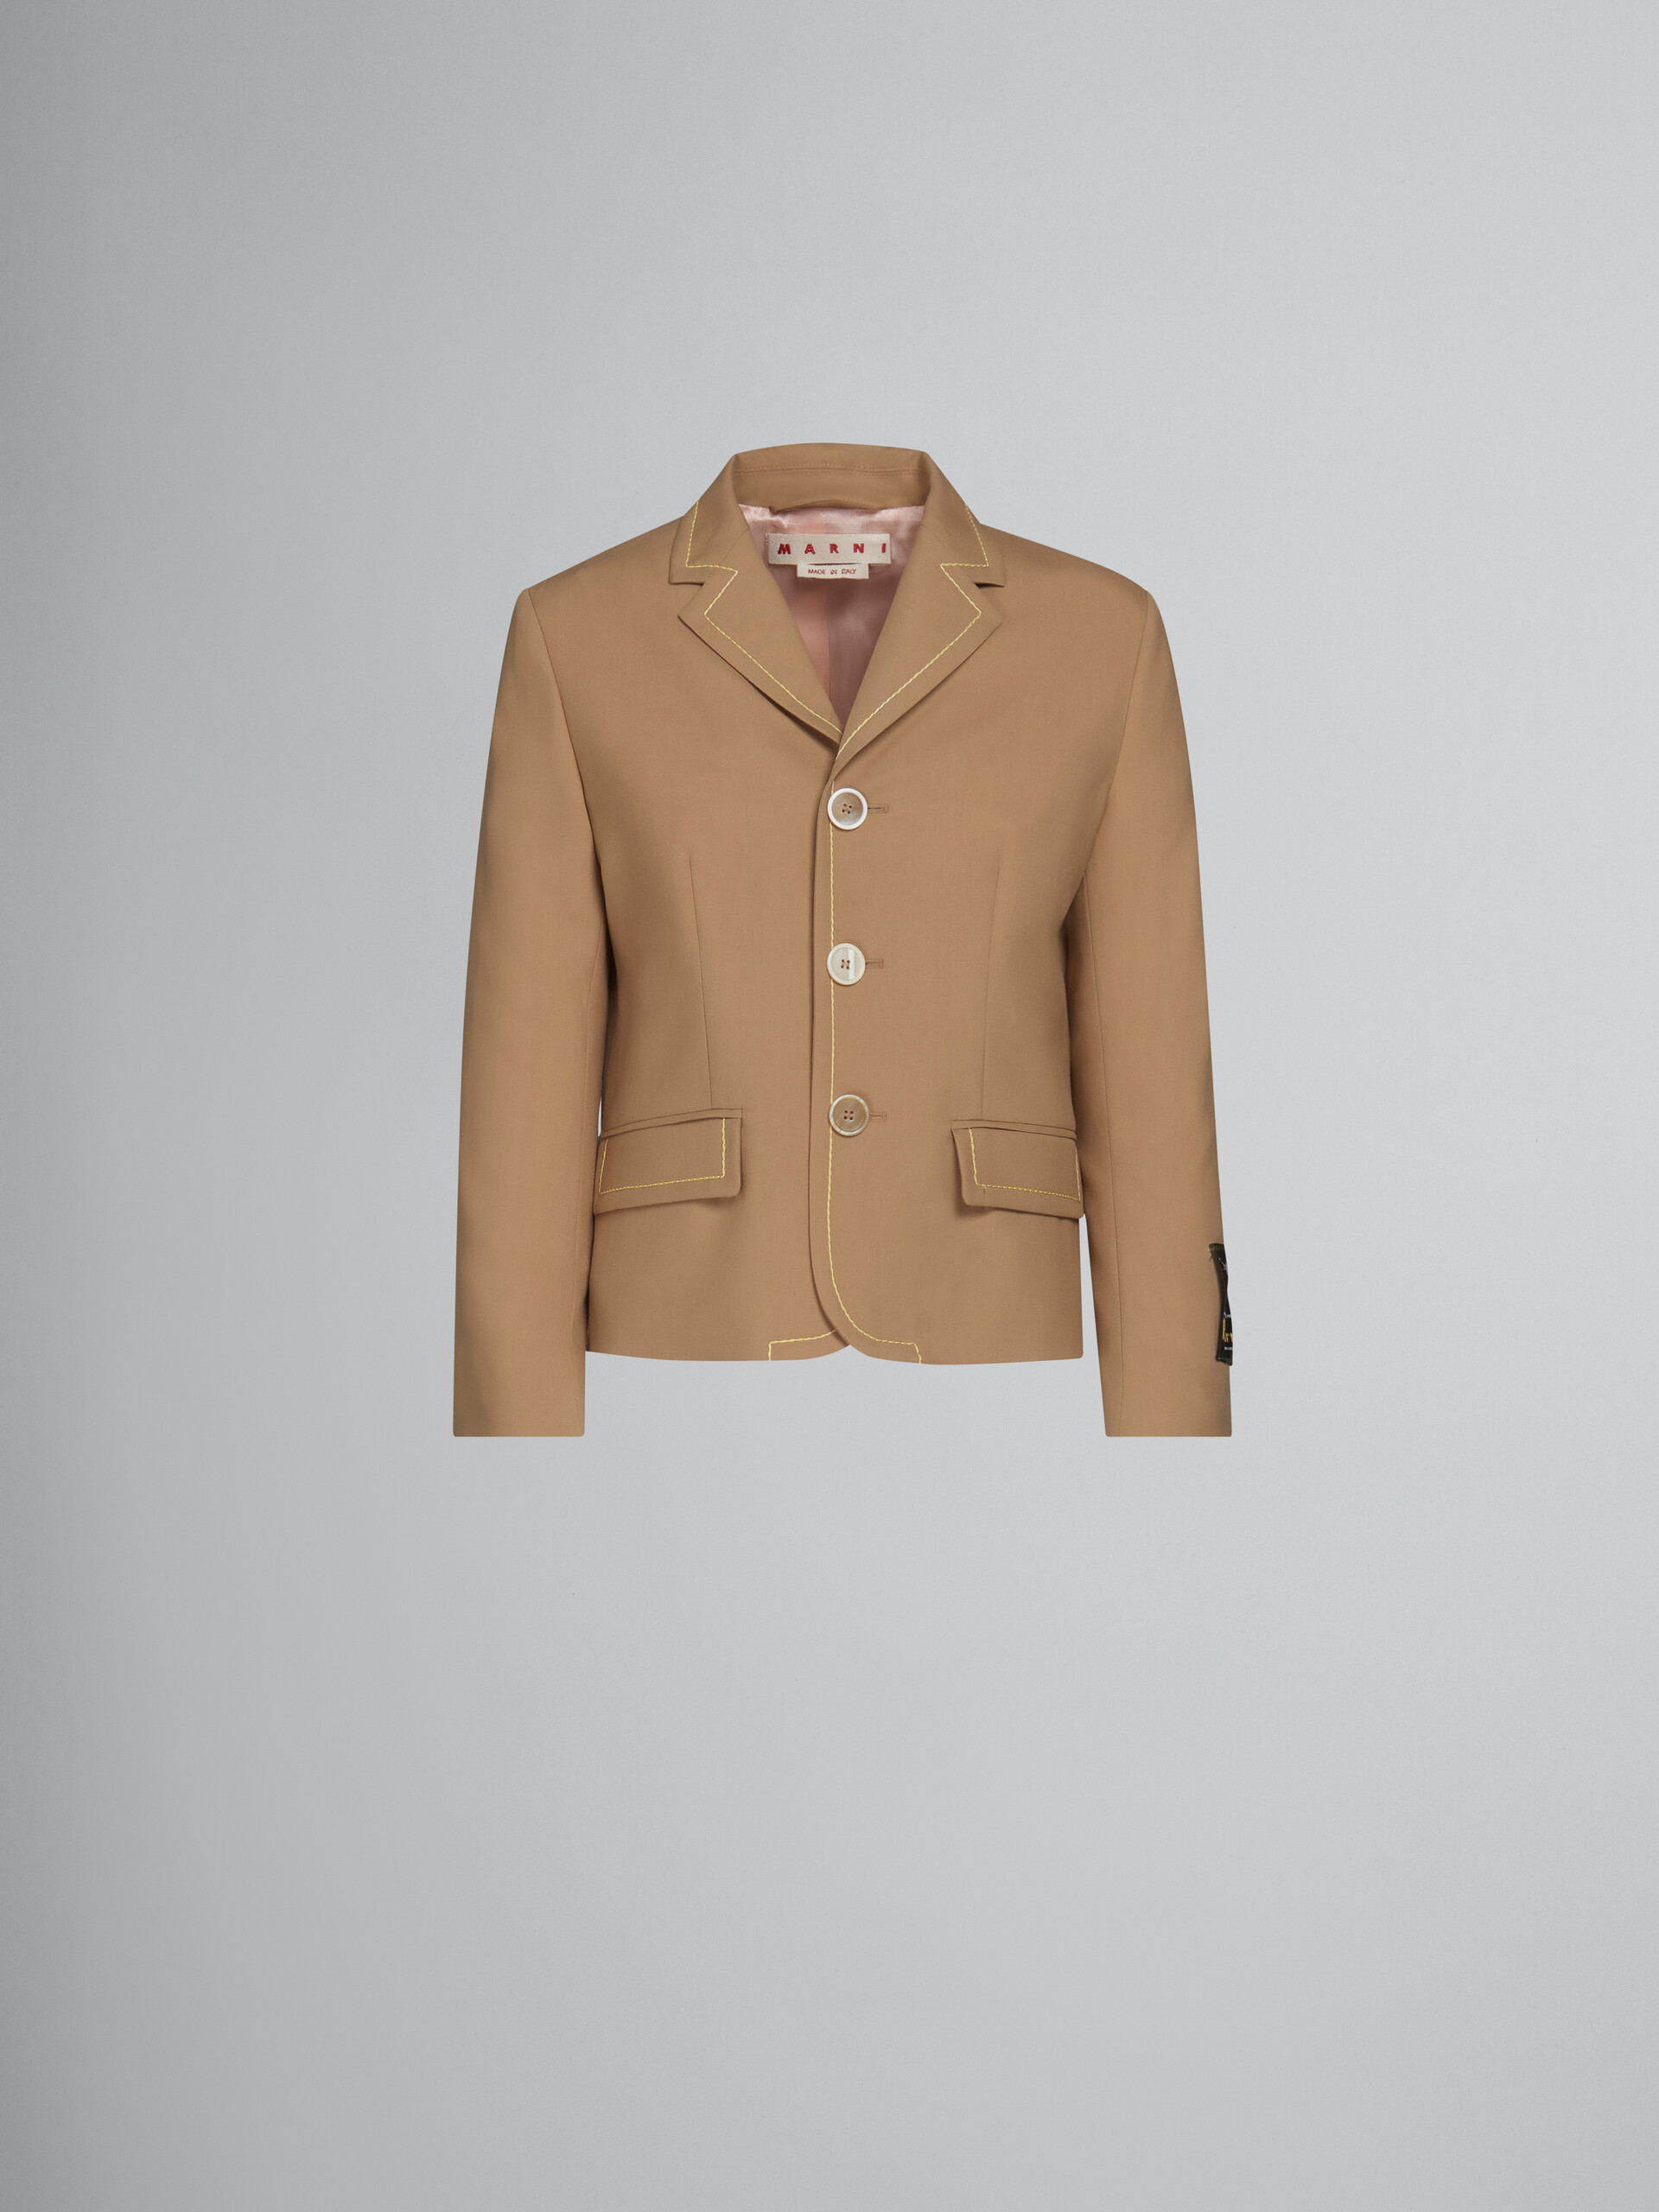 Beige wool jacket with contrast stitching - Jackets - Image 1